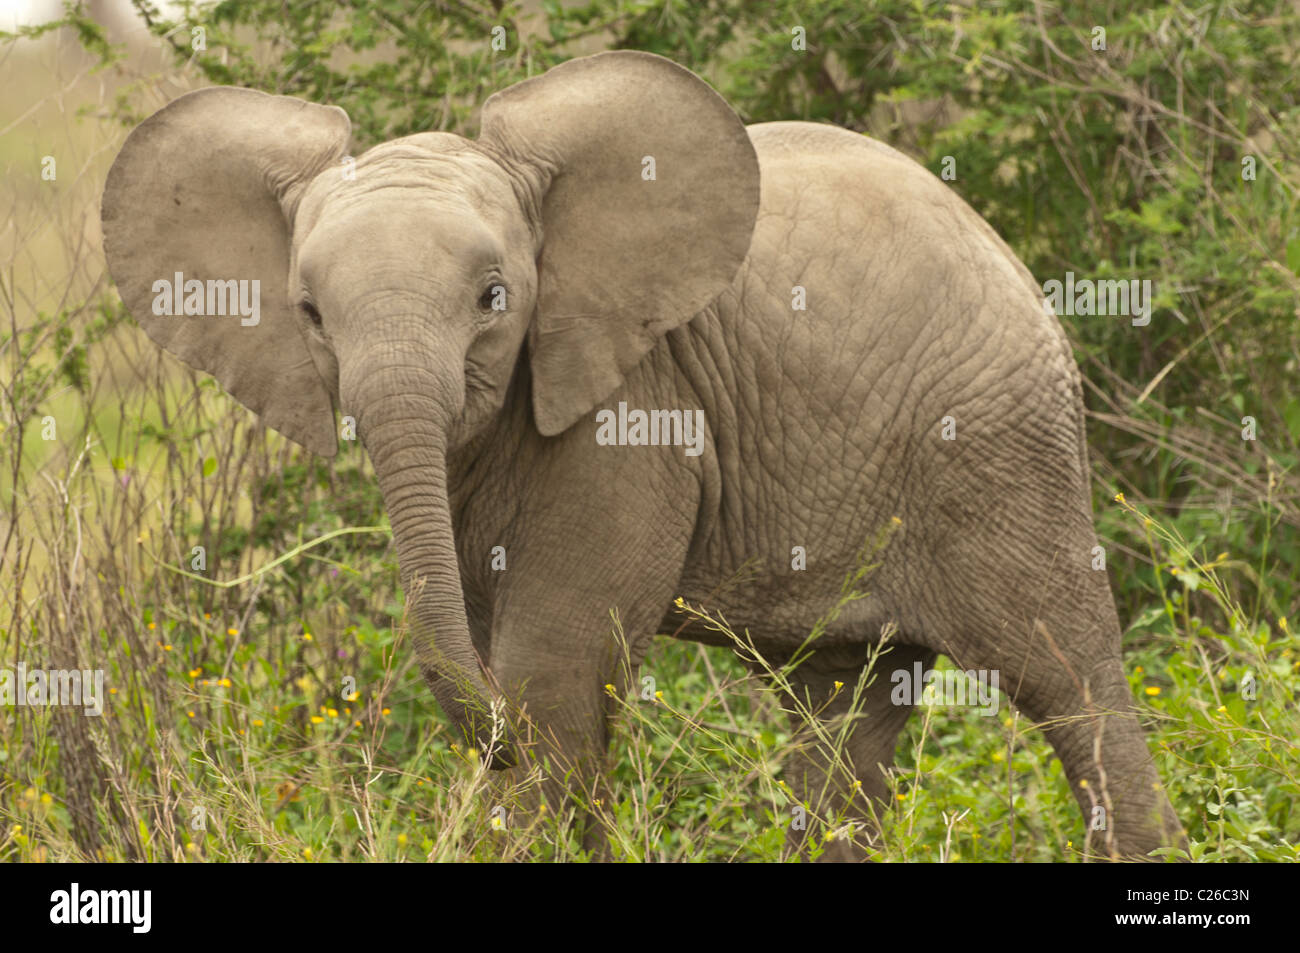 Stock photo of a baby elephant in the woodland, with his big ears on display. Stock Photo